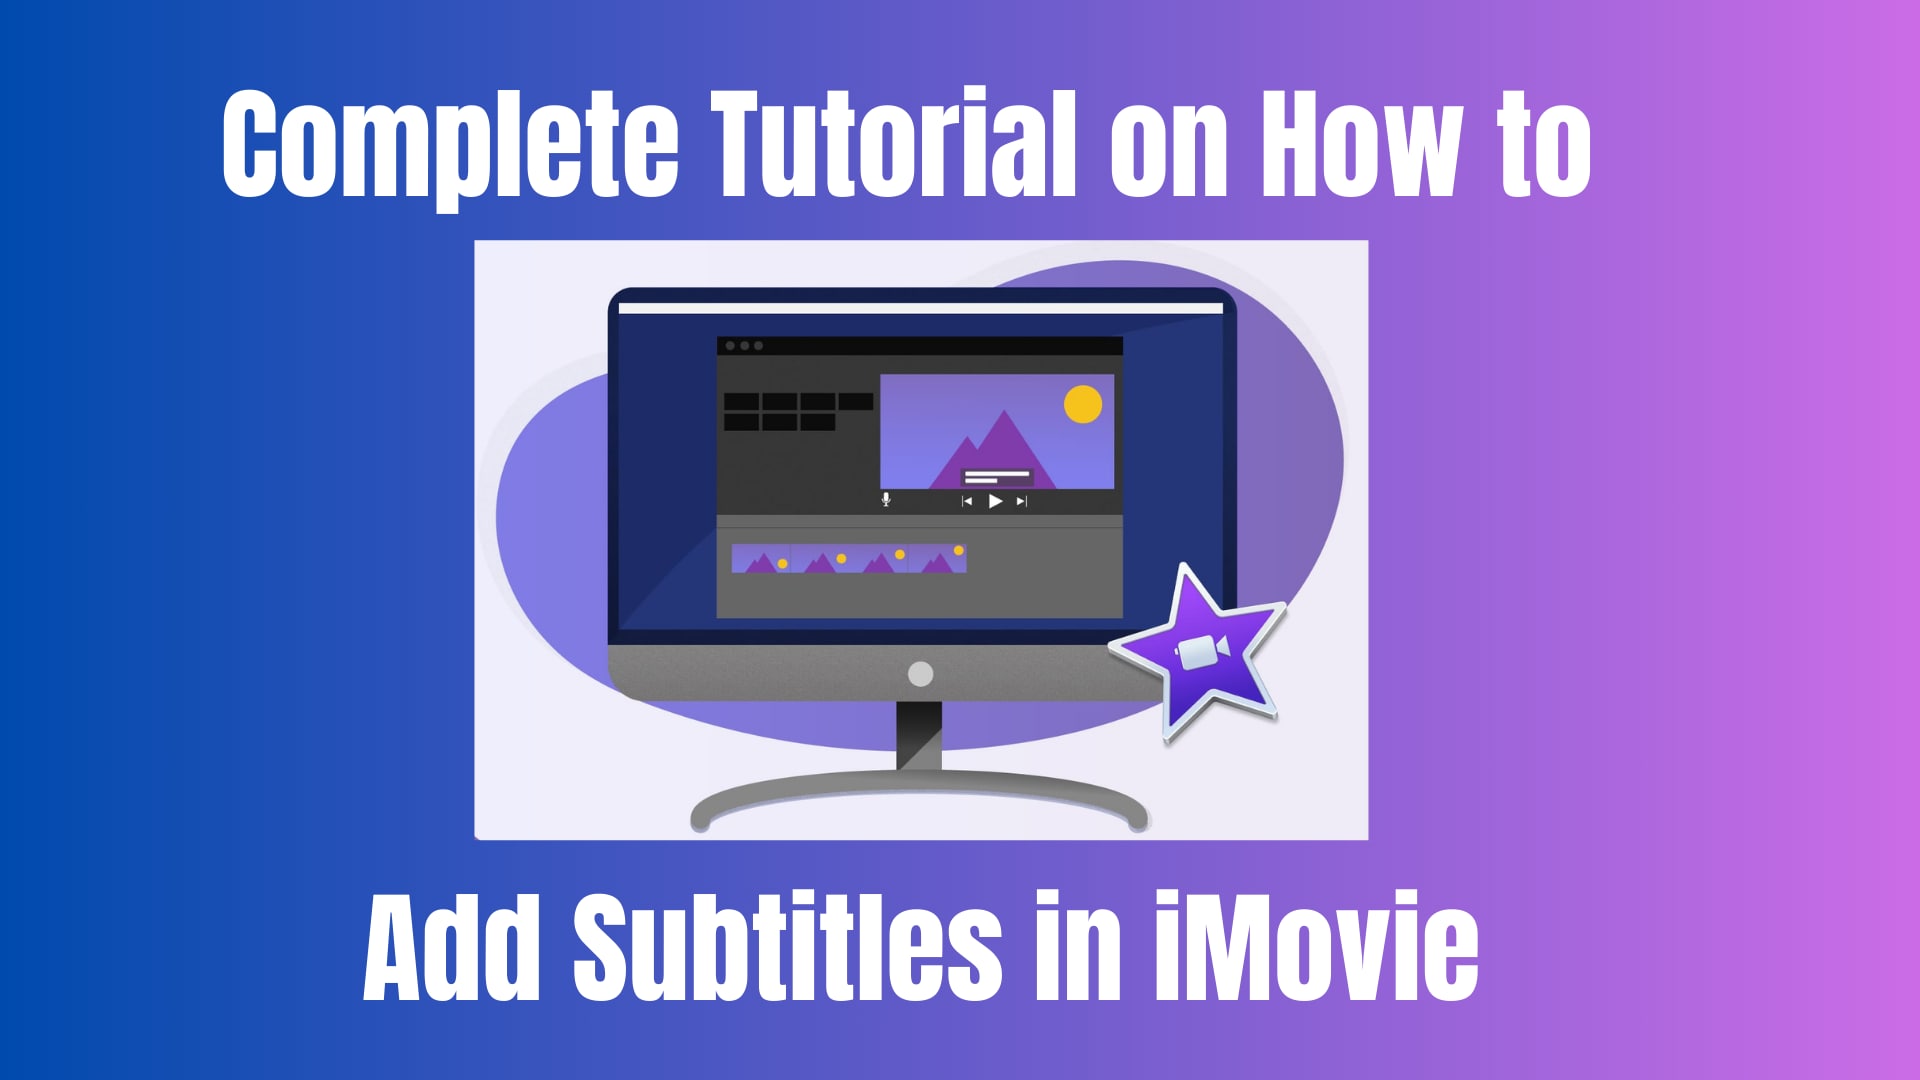 Complete Tutorial on How to Add Subtitles in iMovie